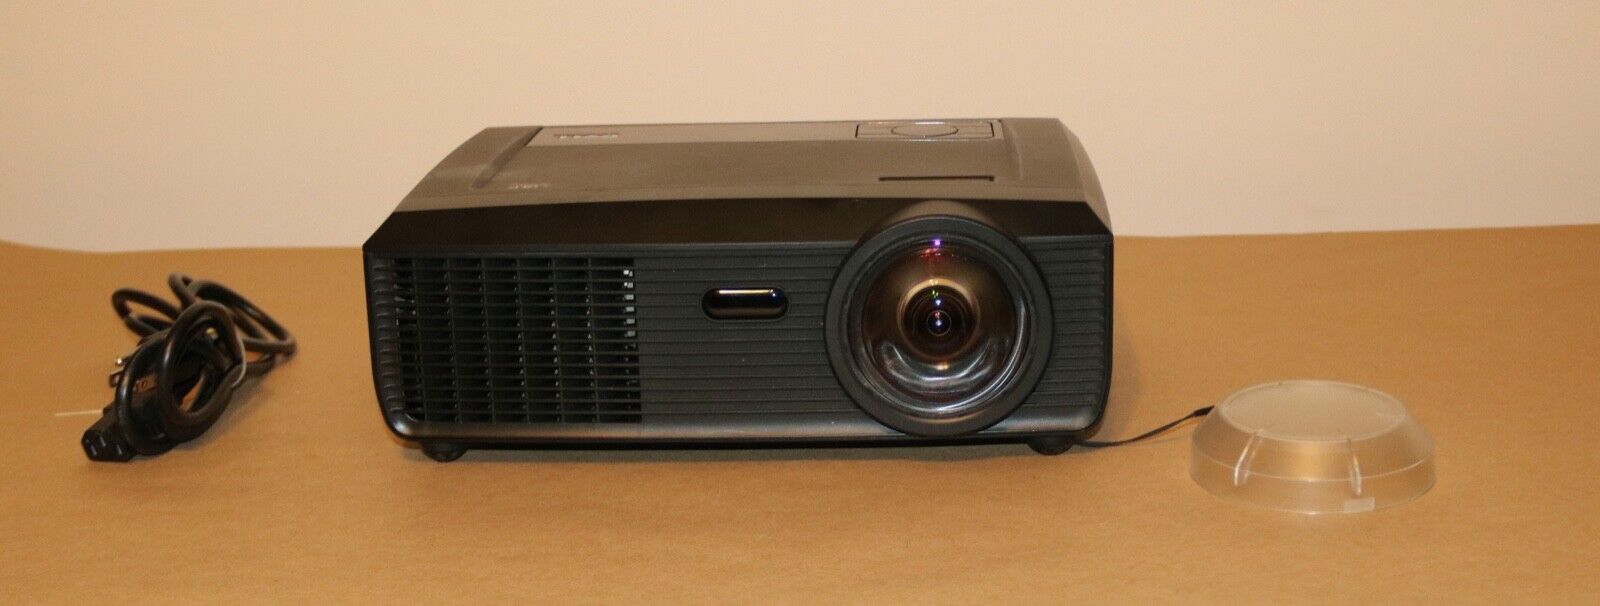 Dell S300wi 2200 Lumens DLP Short-Throw HDMI Projector . Hours Vary 239-464